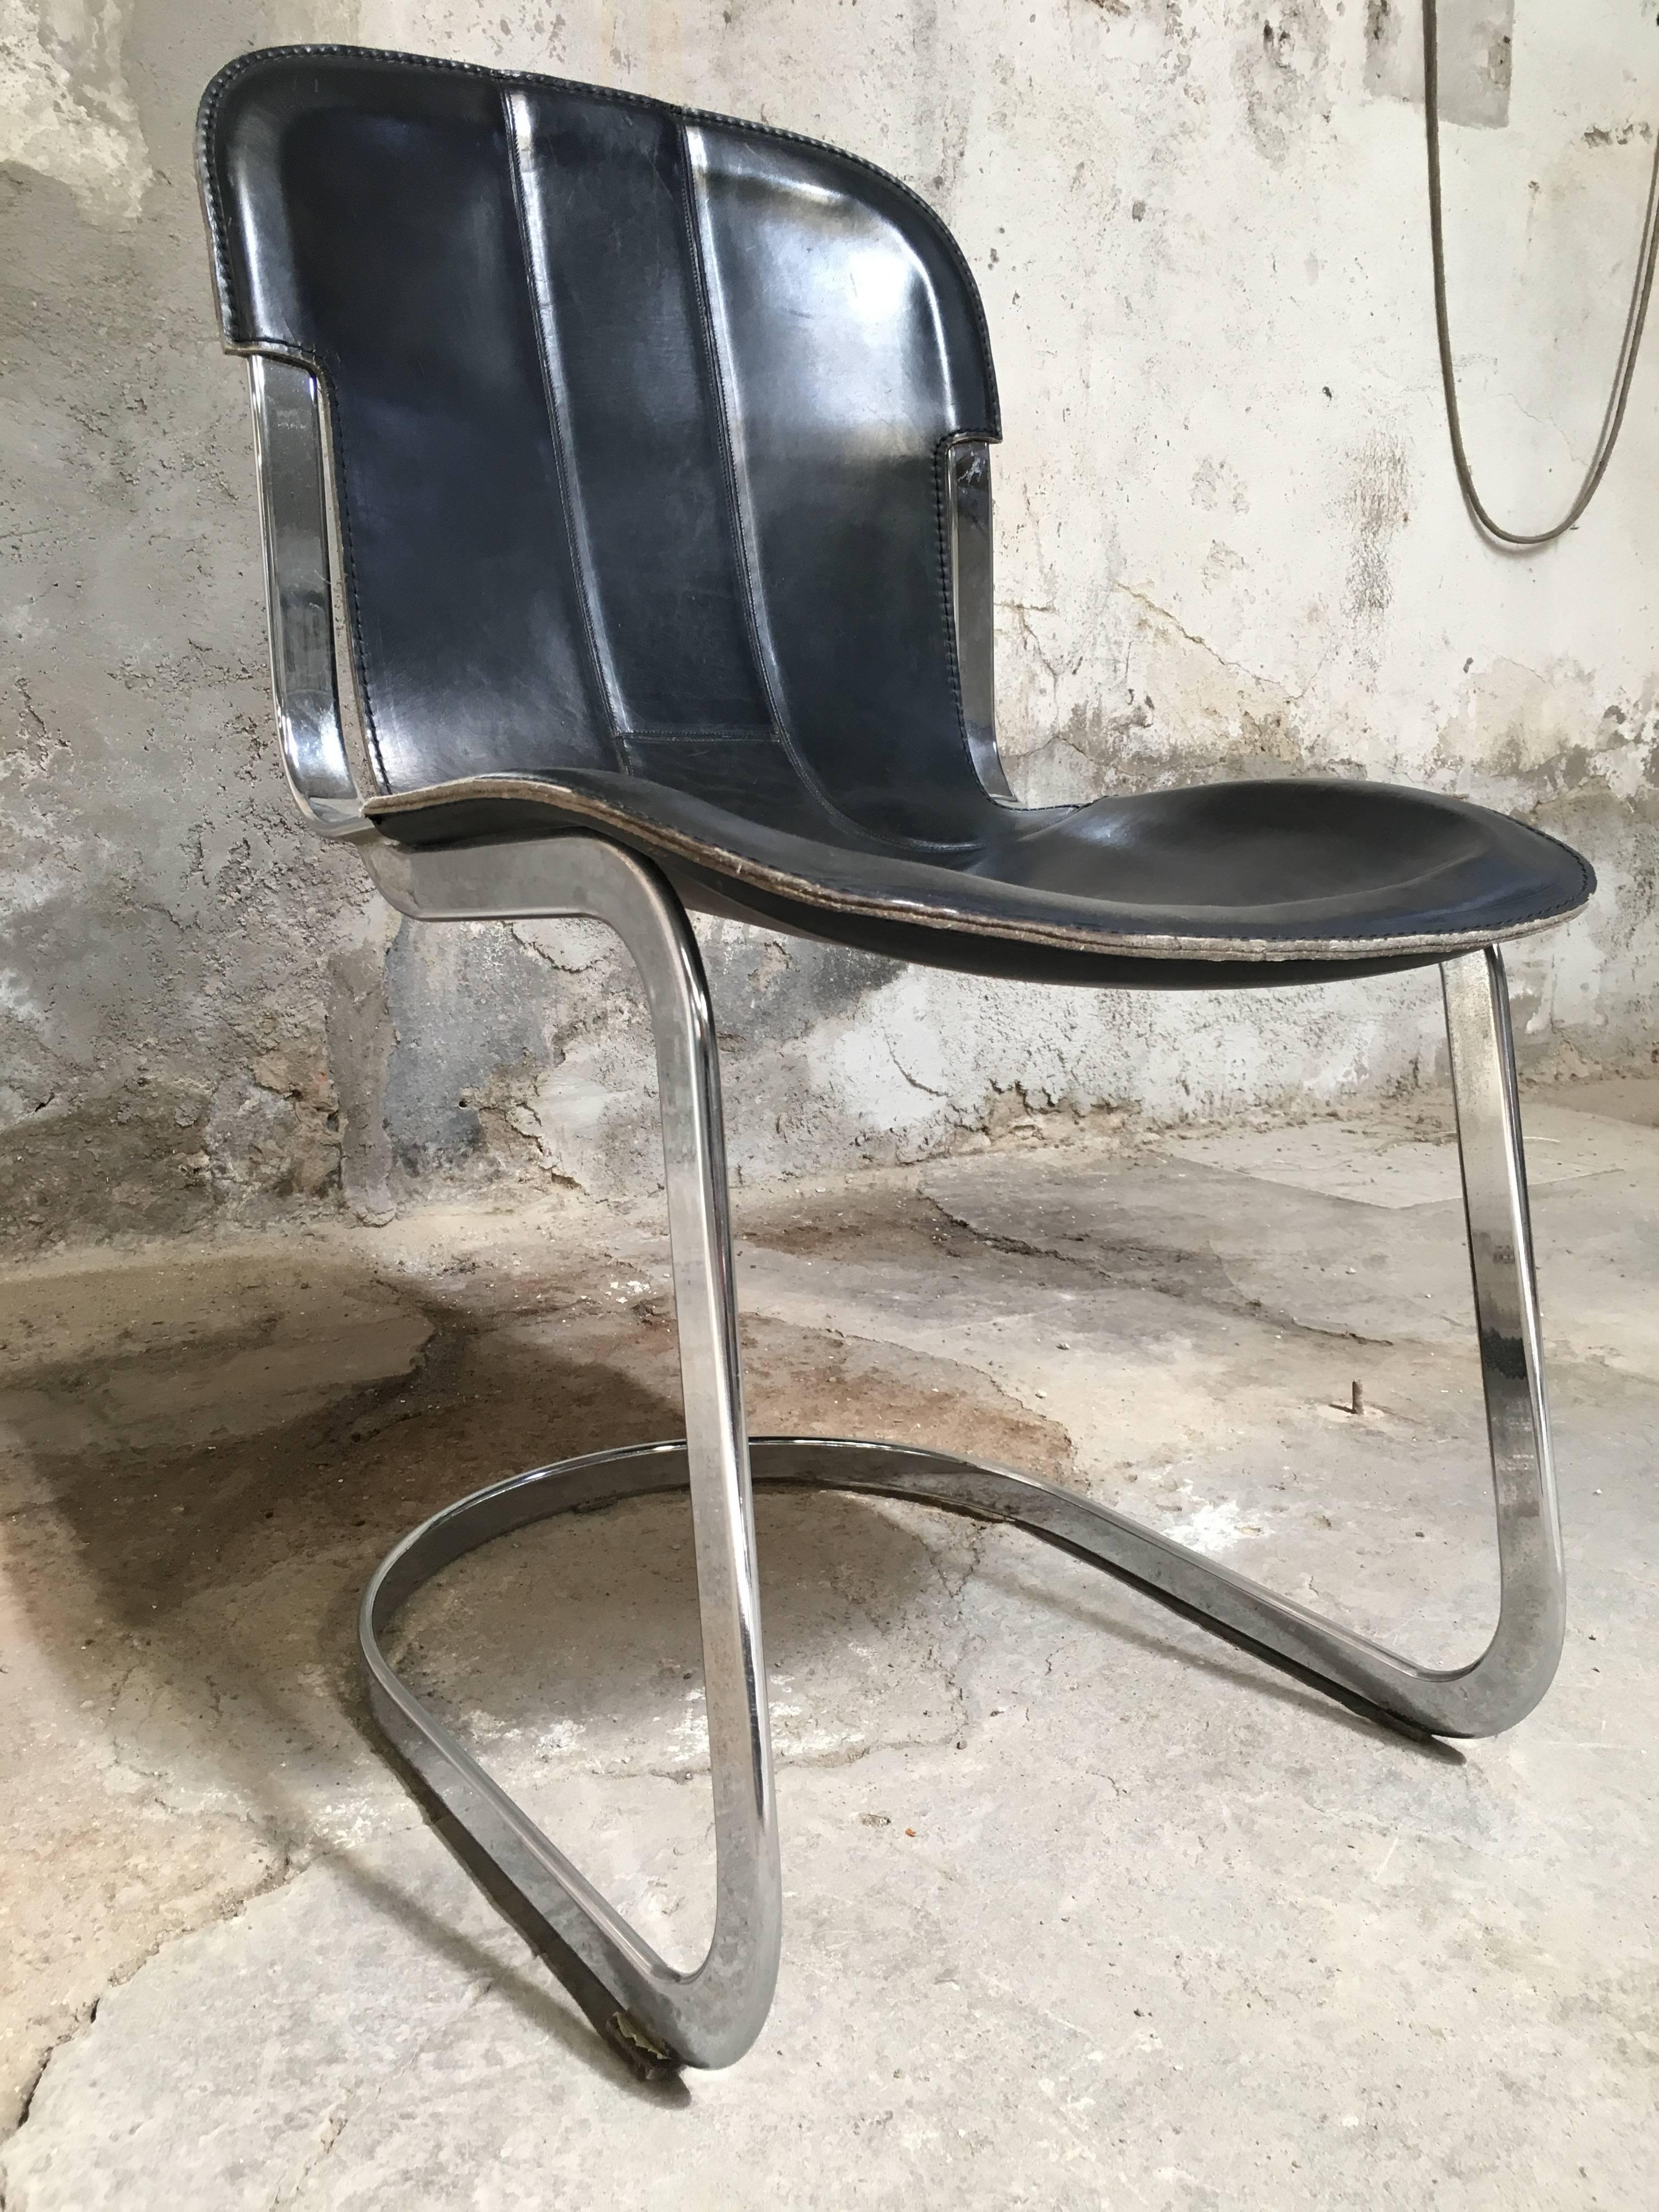 Four Italian Chairs with Original Black Leather Seat by Willy Rizzo for Cidue 3